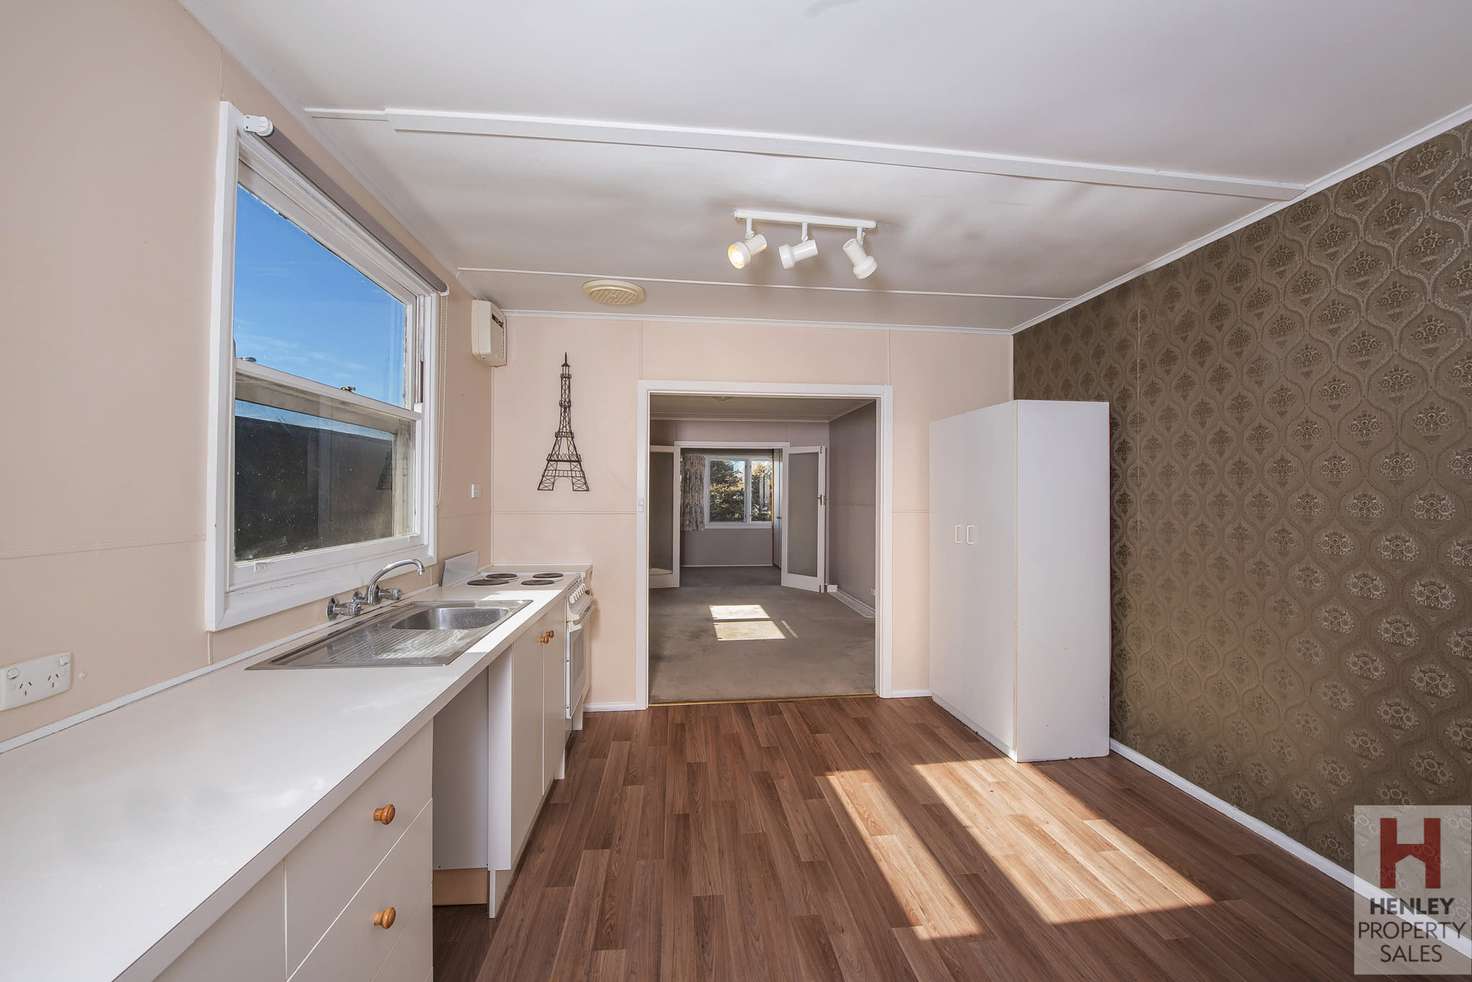 Main view of Homely apartment listing, 64 Jindabyne Road, Berridale NSW 2628